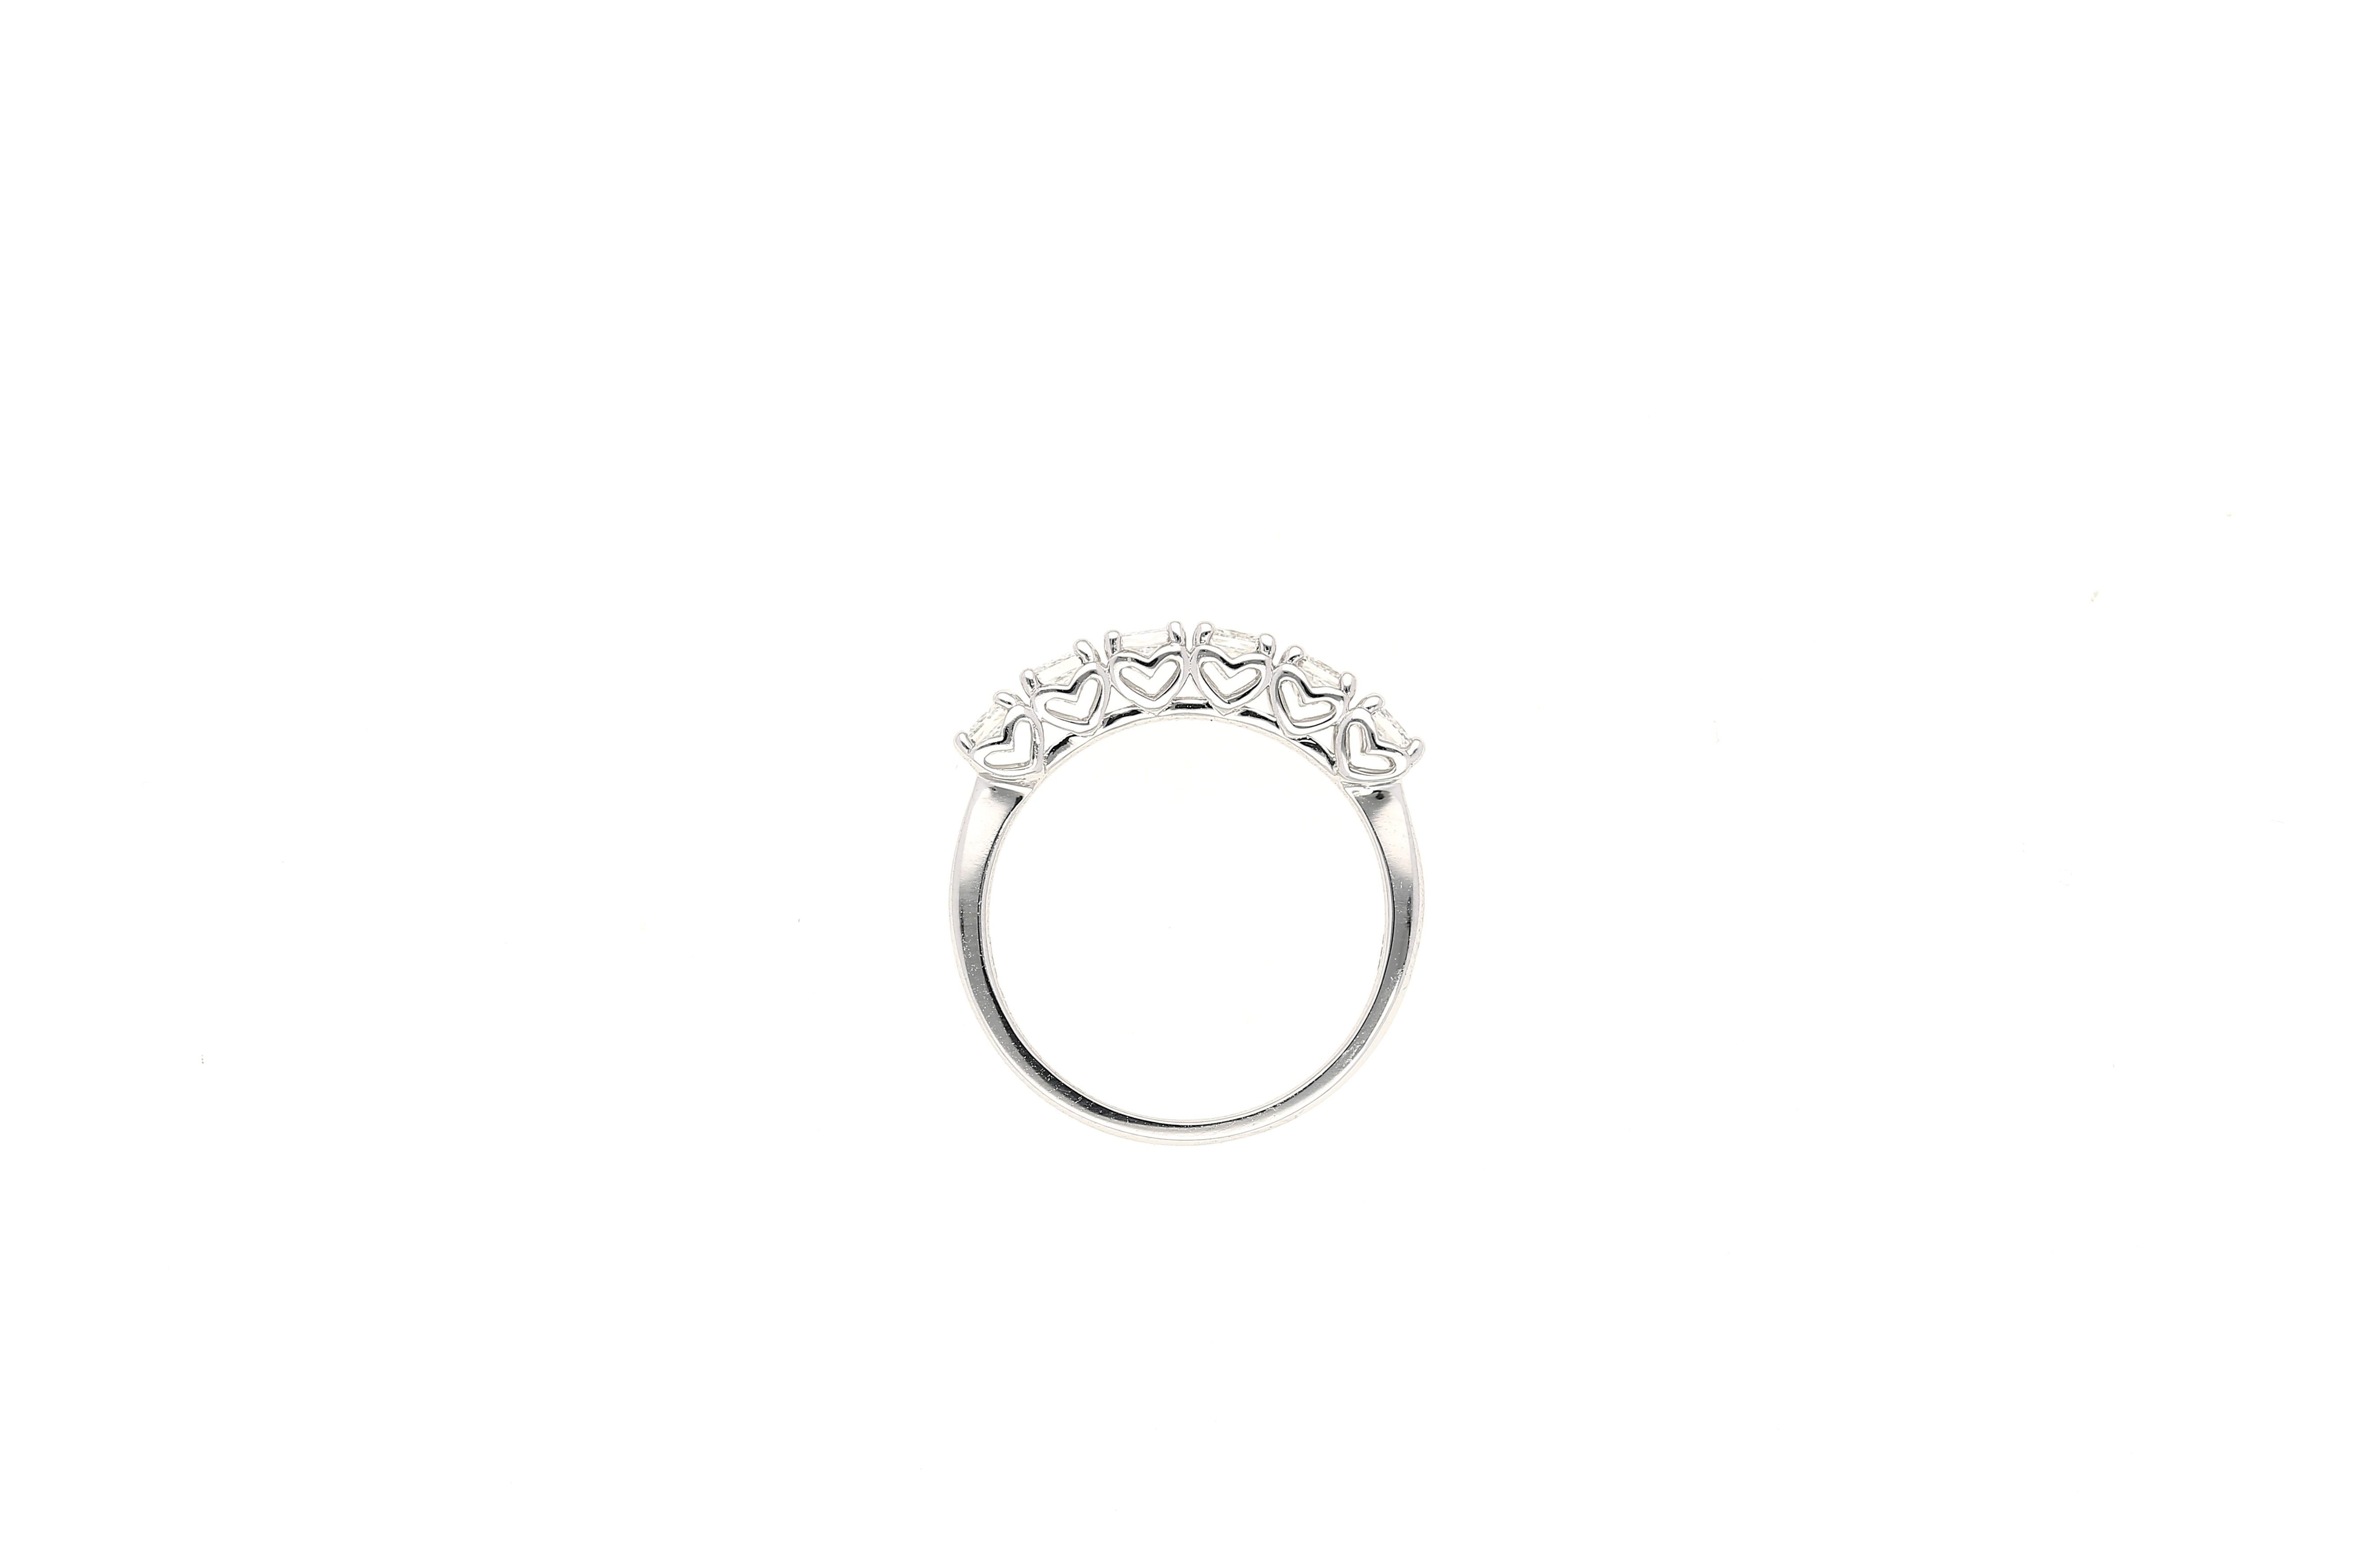 6 near-flawless natural princess cut diamonds prong-set in half eternity band ring. All set in 18k solid white gold. The ideal band for stacking or wearing alone. Each diamond is mounted gracefully with 4 prongs. 

Notice how the setting has 6 gold